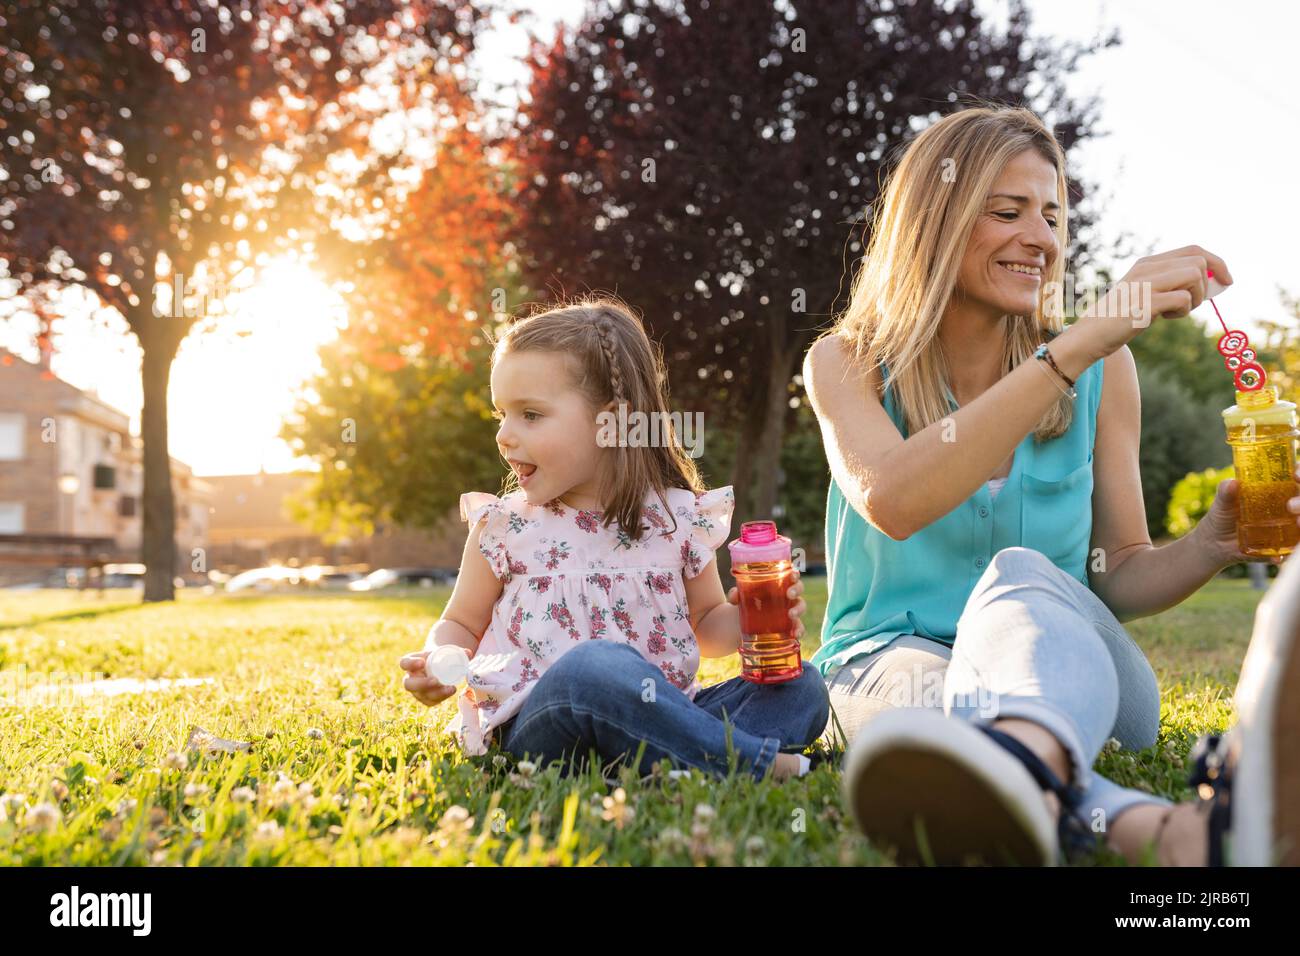 Smiling mother and daughter with bubble wands at park Stock Photo